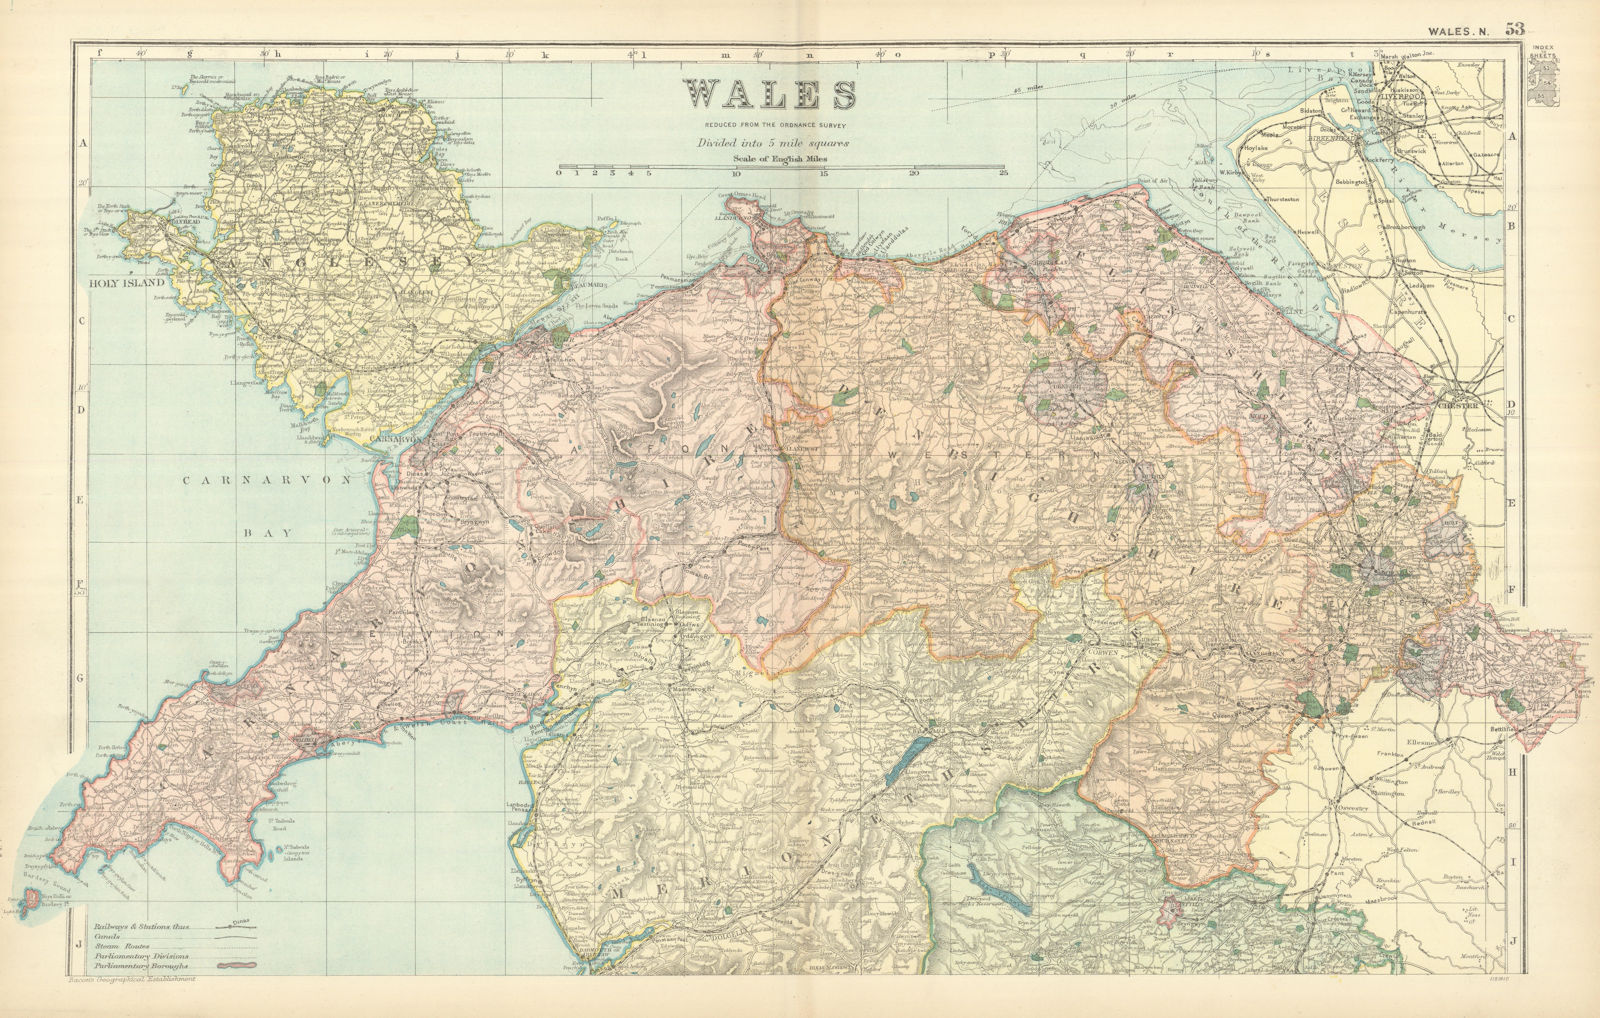 NORTH WALES. Showing Parliamentary divisions & boroughs. BACON 1898 old map